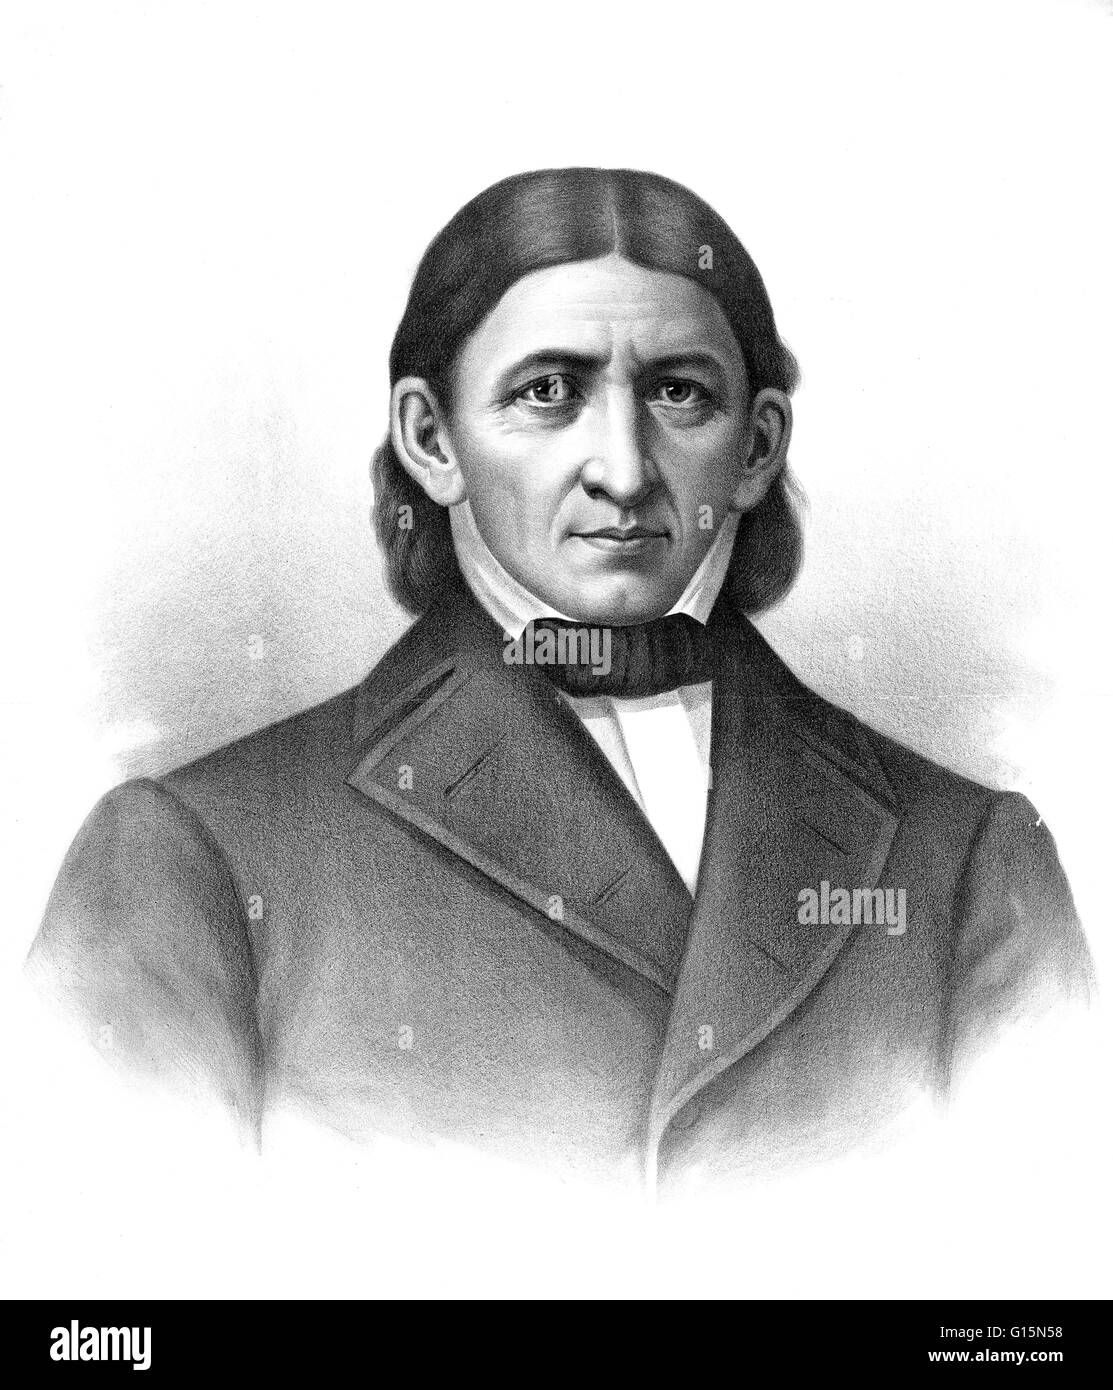 Friedrich Wilhelm August Fröbel (April 21, 1782 - June 21, 1852) was a German pedagogue, a student of Pestalozzi who laid the foundation for modern education based on the recognition that children have unique needs and capabilities. In 1826 he published h Stock Photo